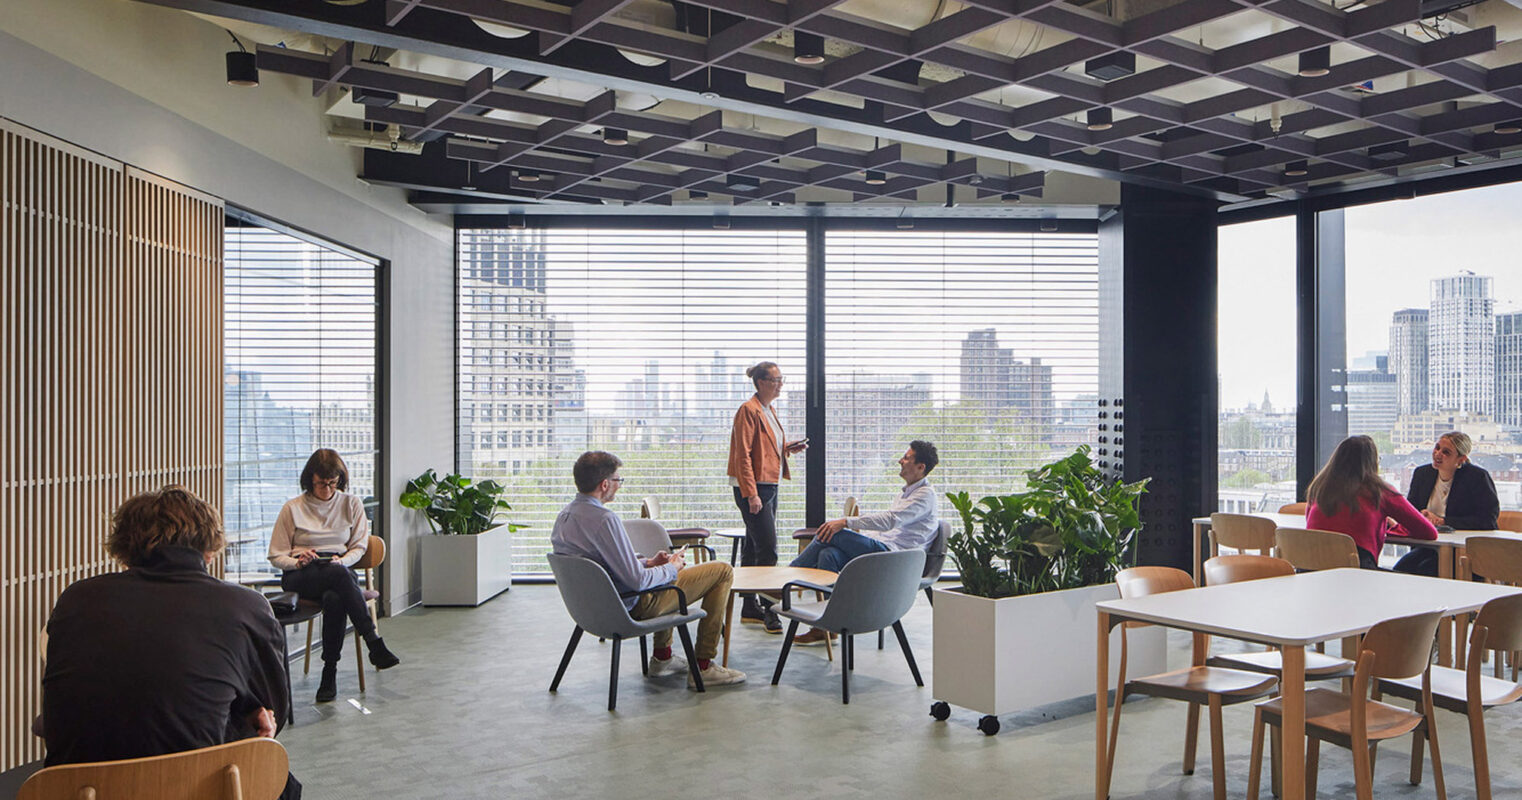 Open-plan office space with natural light, featuring a mix of standing and seated workstations, minimalist furniture, and indoor greenery, overlooking an urban skyline. Vertical slats partition the area while preserving a sense of openness.